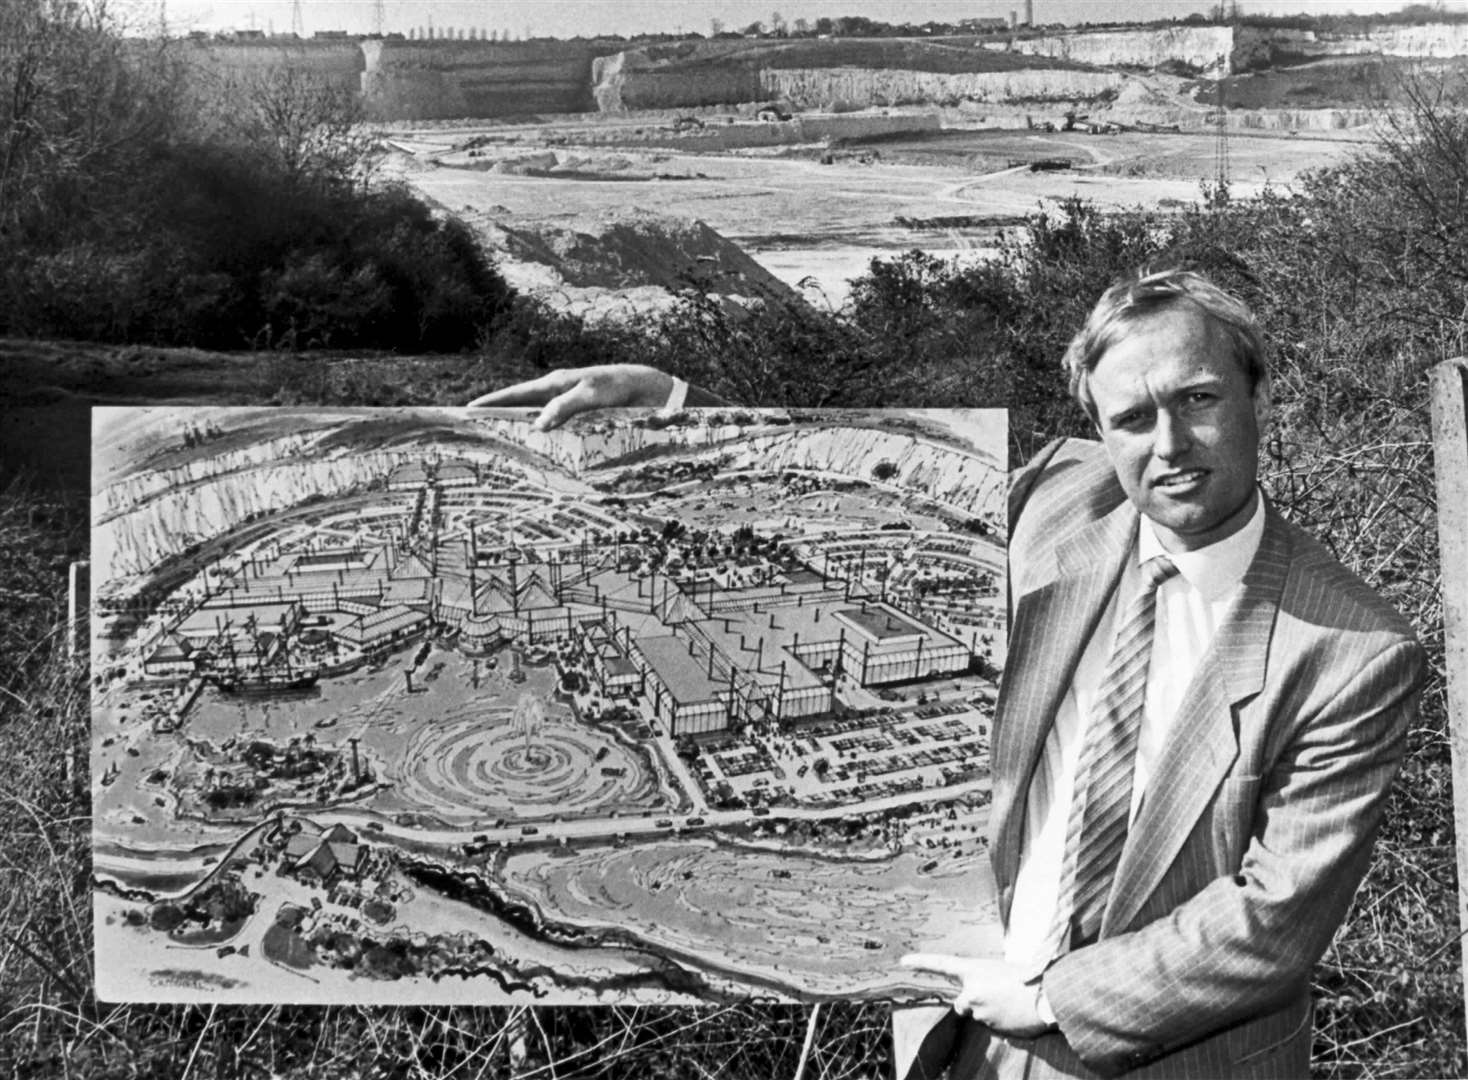 Tim Hook, project manager of Blue Water Park, with plans for the superc entre in the quarry site. Pictured here in April 1988.